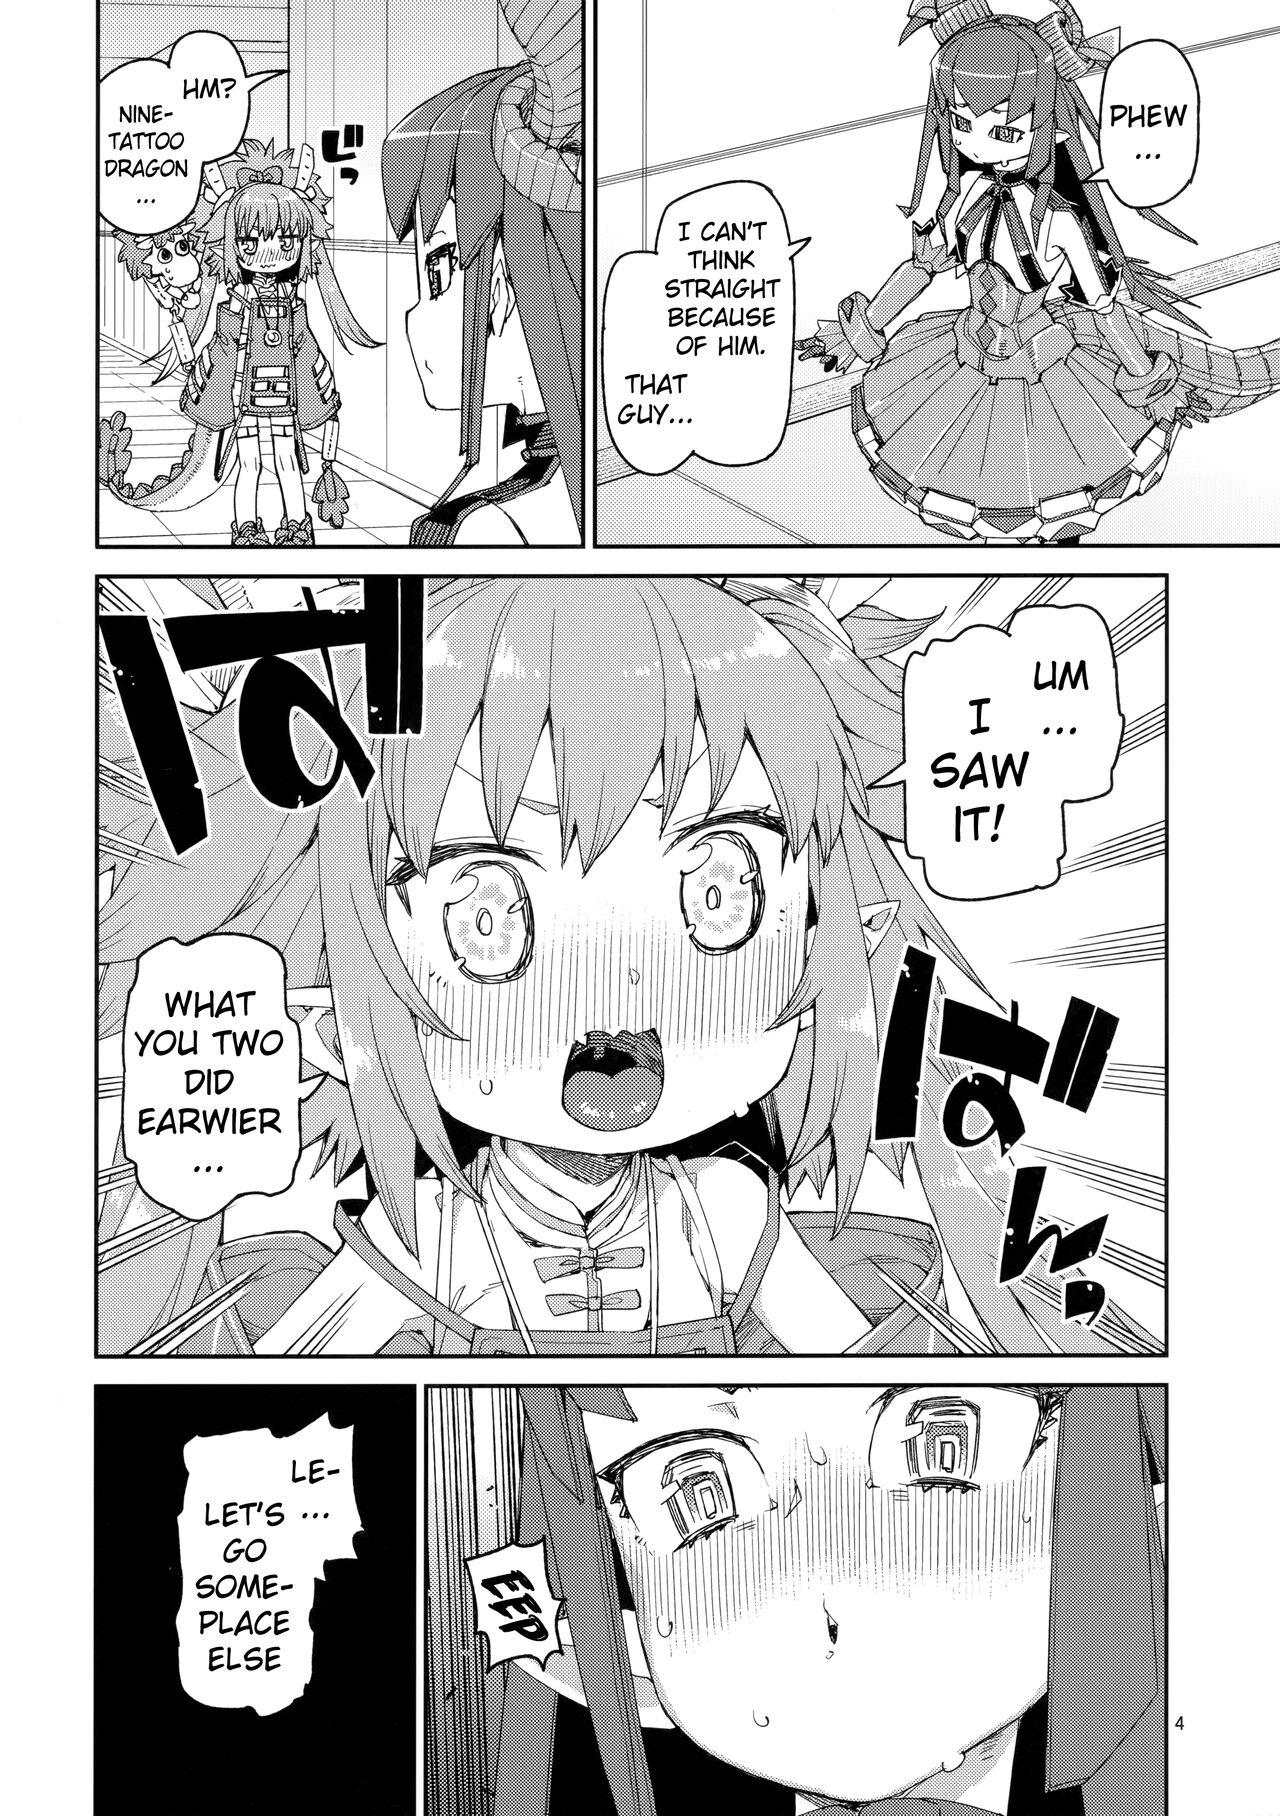 Porn Nakamahazure wa Iya! | I Hate Being Left Out! - Fate grand order Small Tits Porn - Page 5